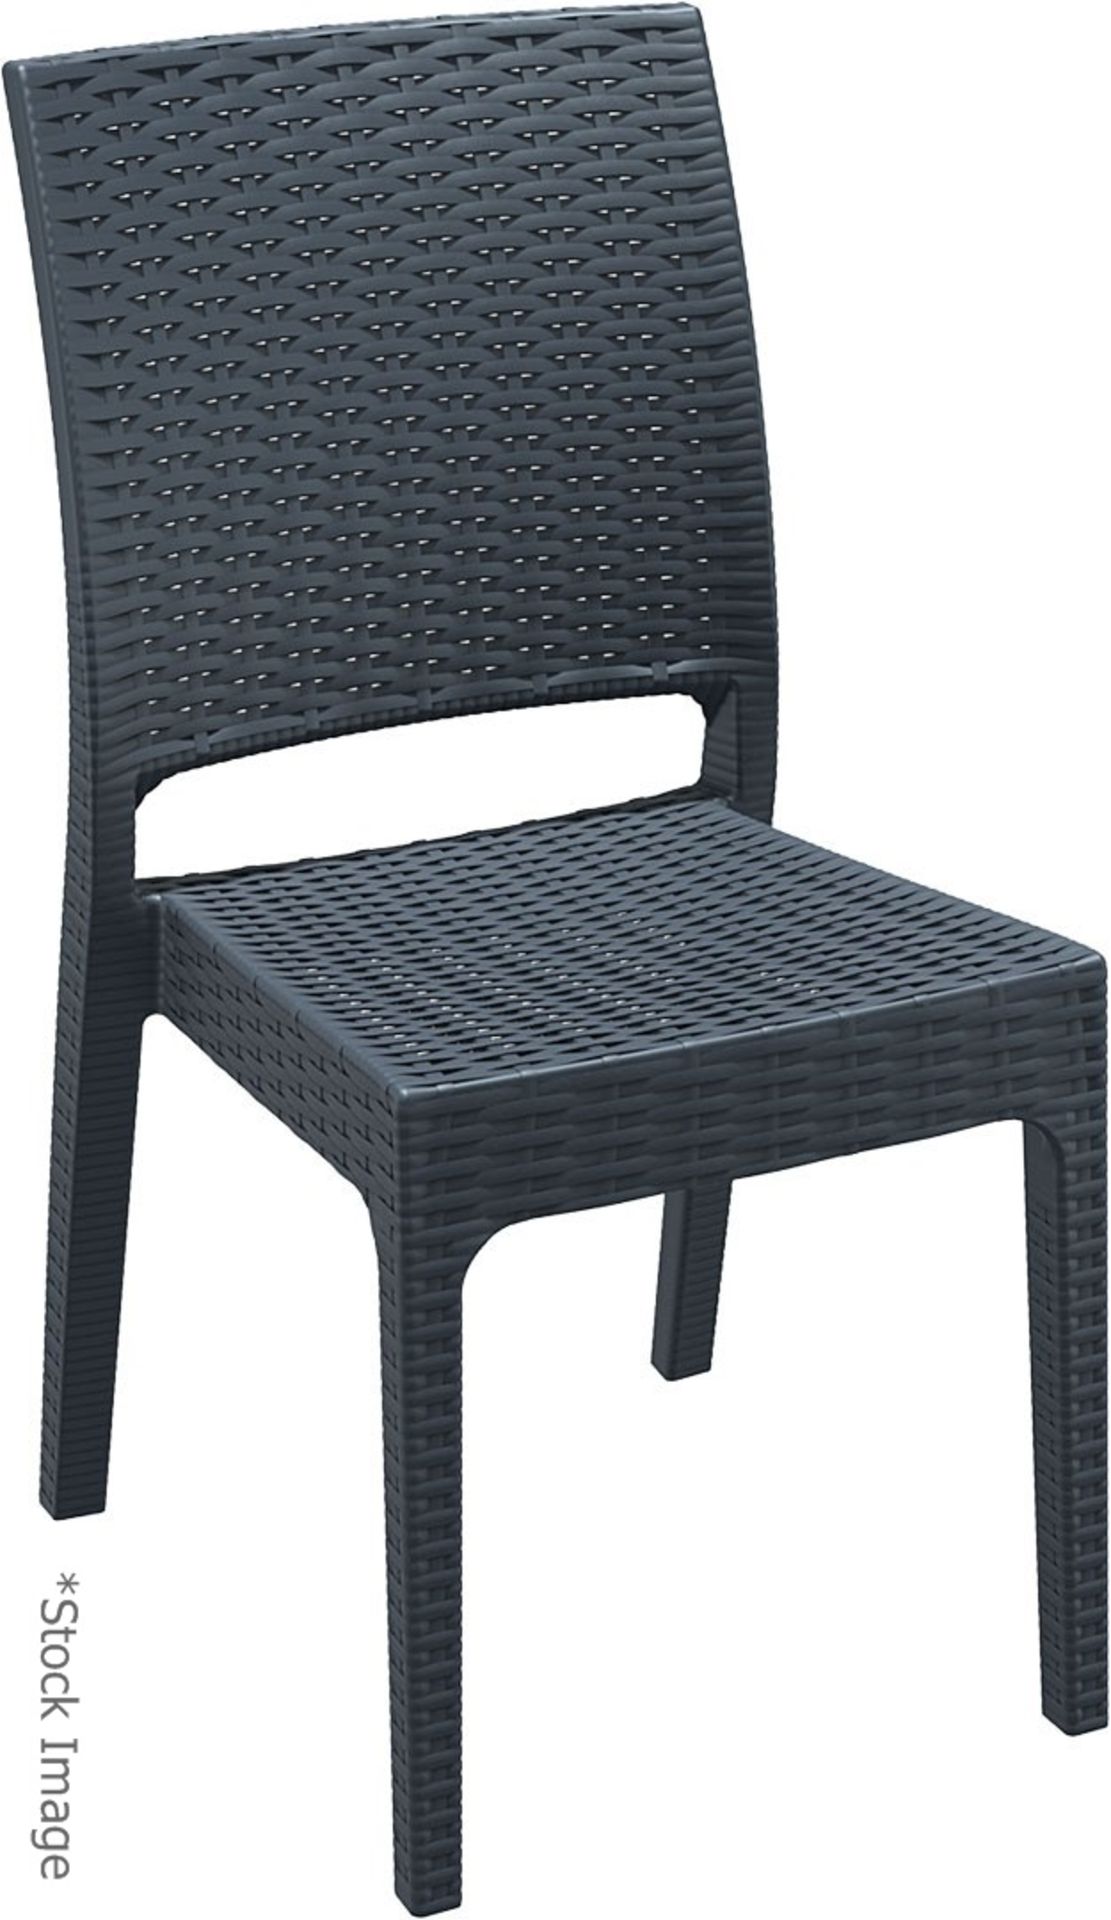 8 x SIESTA EXCLUSIVE 'Florida' Commercial Stackable Rattan-style Chairs In Dark Grey -CL987 - - Image 6 of 13